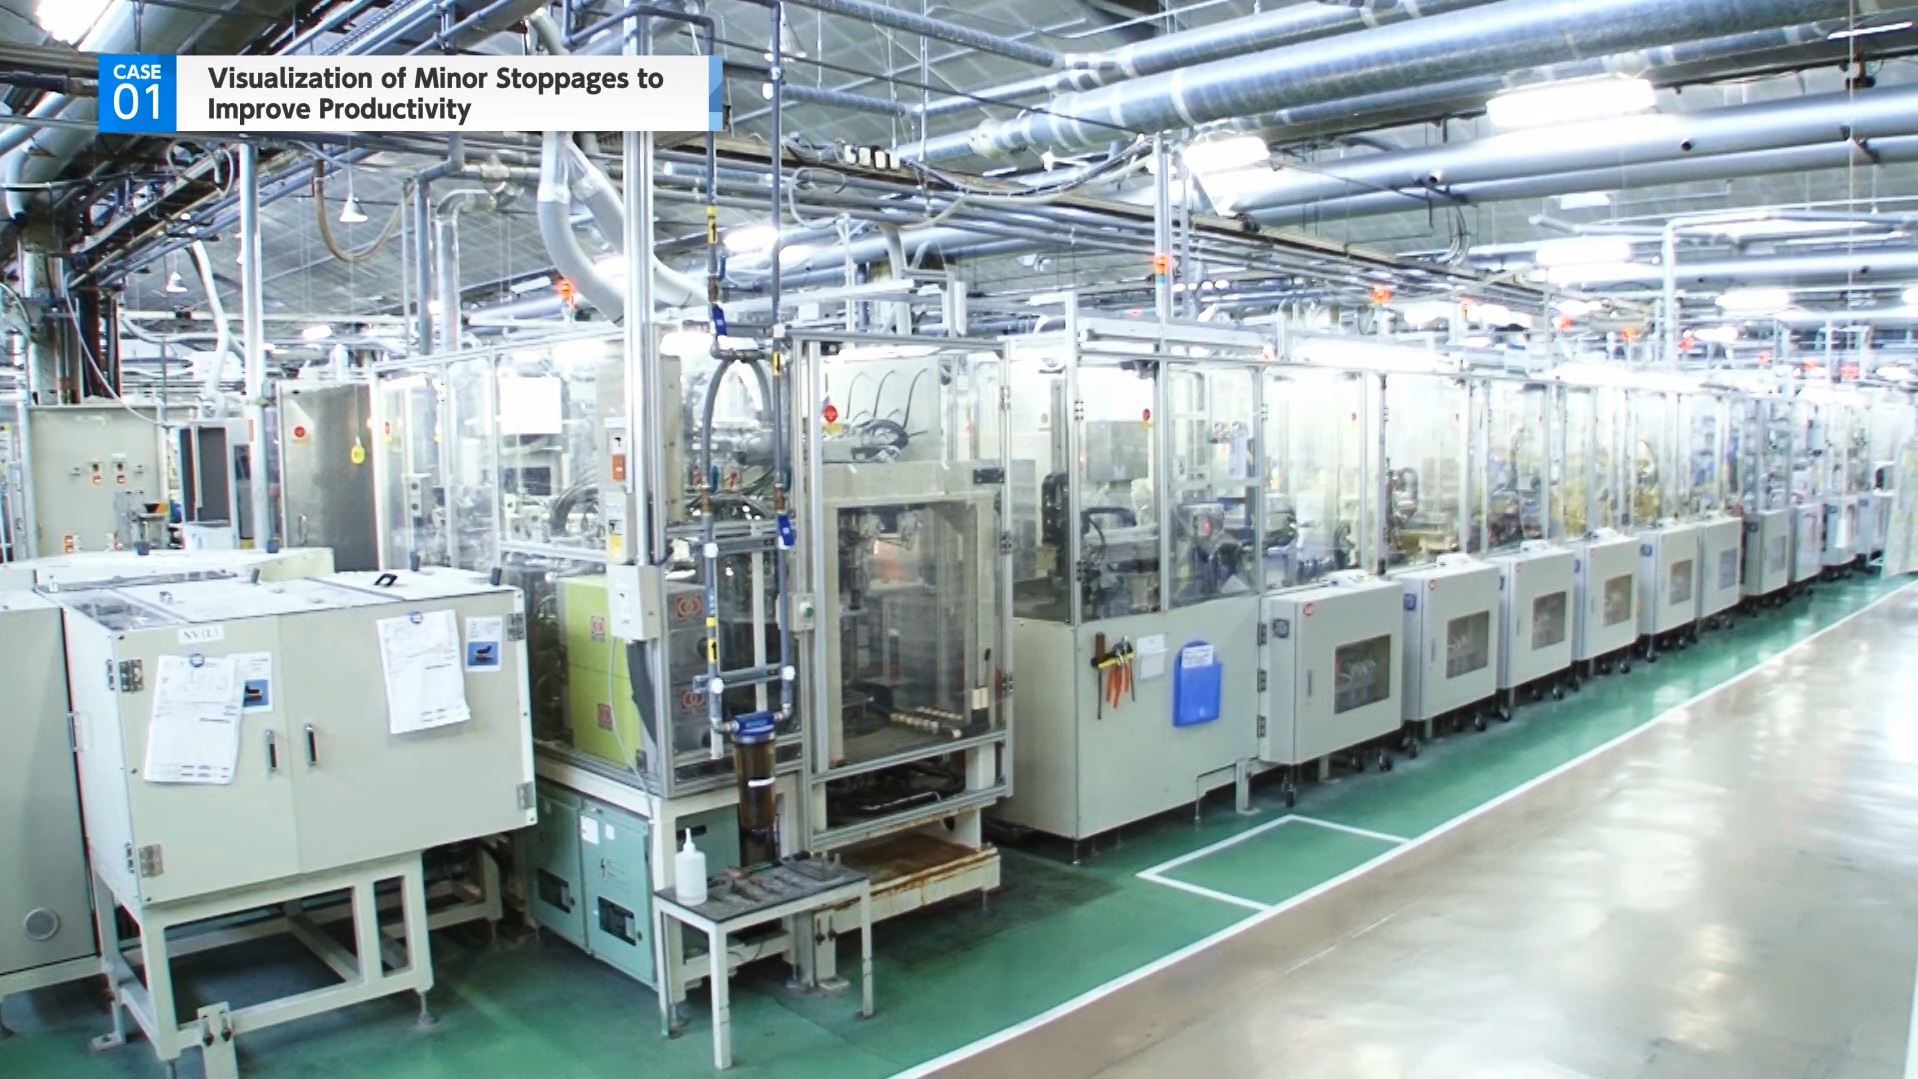 The second factory tour will introduce the production lines at Mitsubishi Electric’s Fukuyama Works, which utilize the integrated FA-IT solution “e-F@ctory” to achieve digital manufacturing.